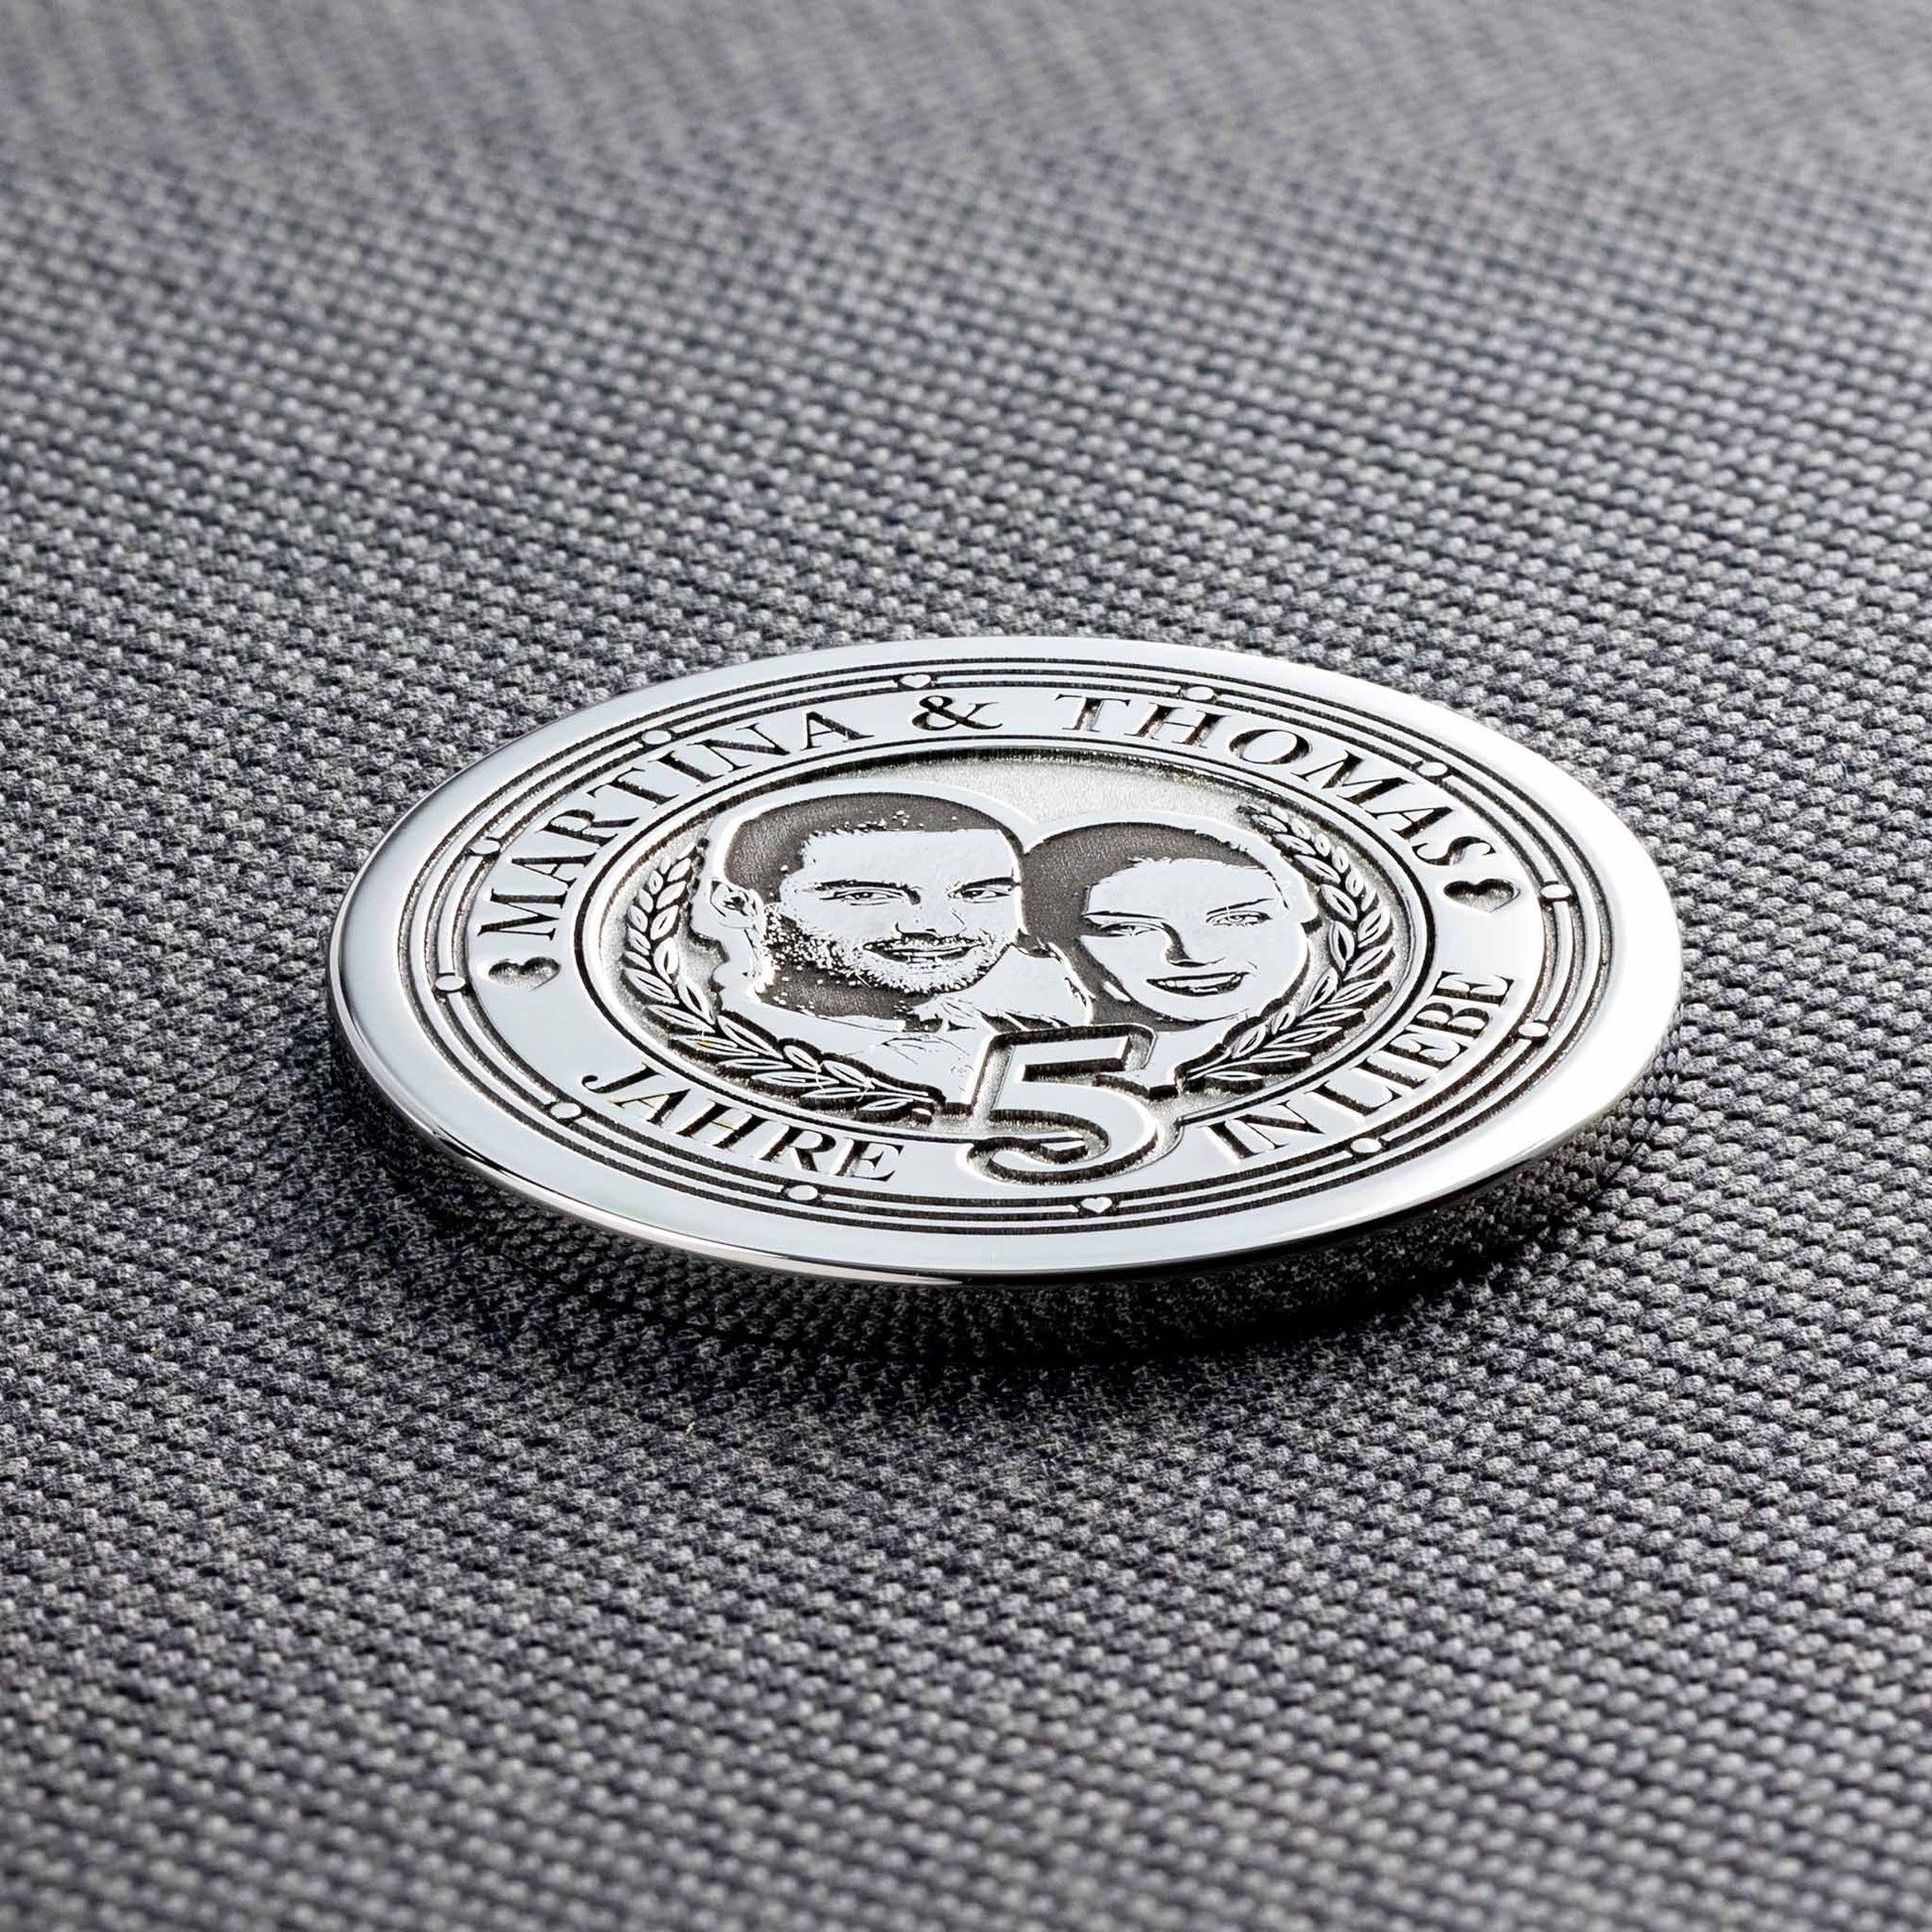 Unique 5 Year Wedding Anniversary Gift: Personalised Anniversary Coin - seQua.Shop